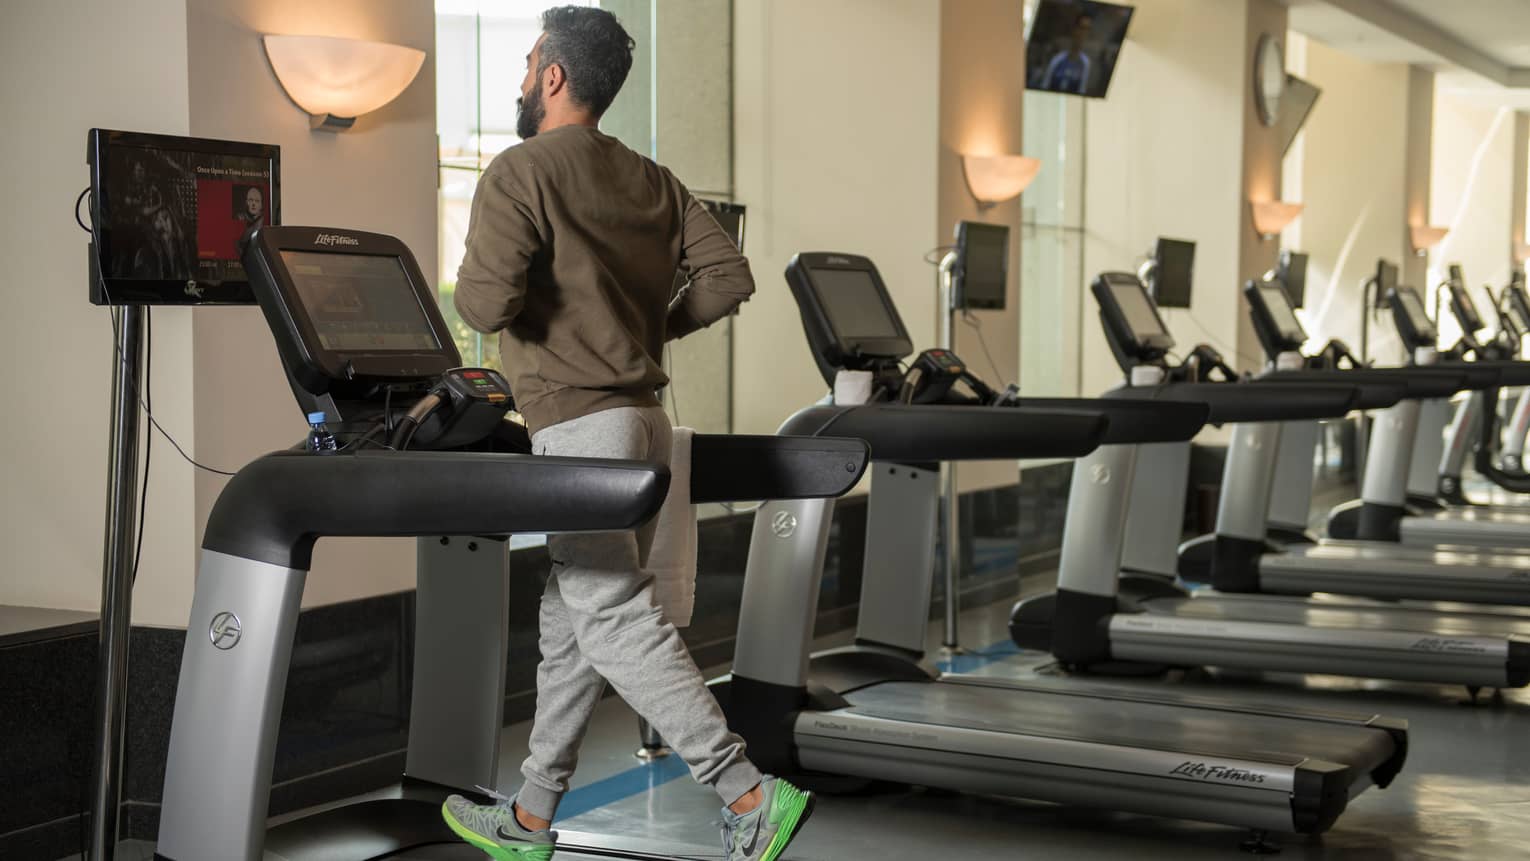 Back of man in sweatshirt and sweatpants as he runs on treadmill in gym next to row of cardio machines